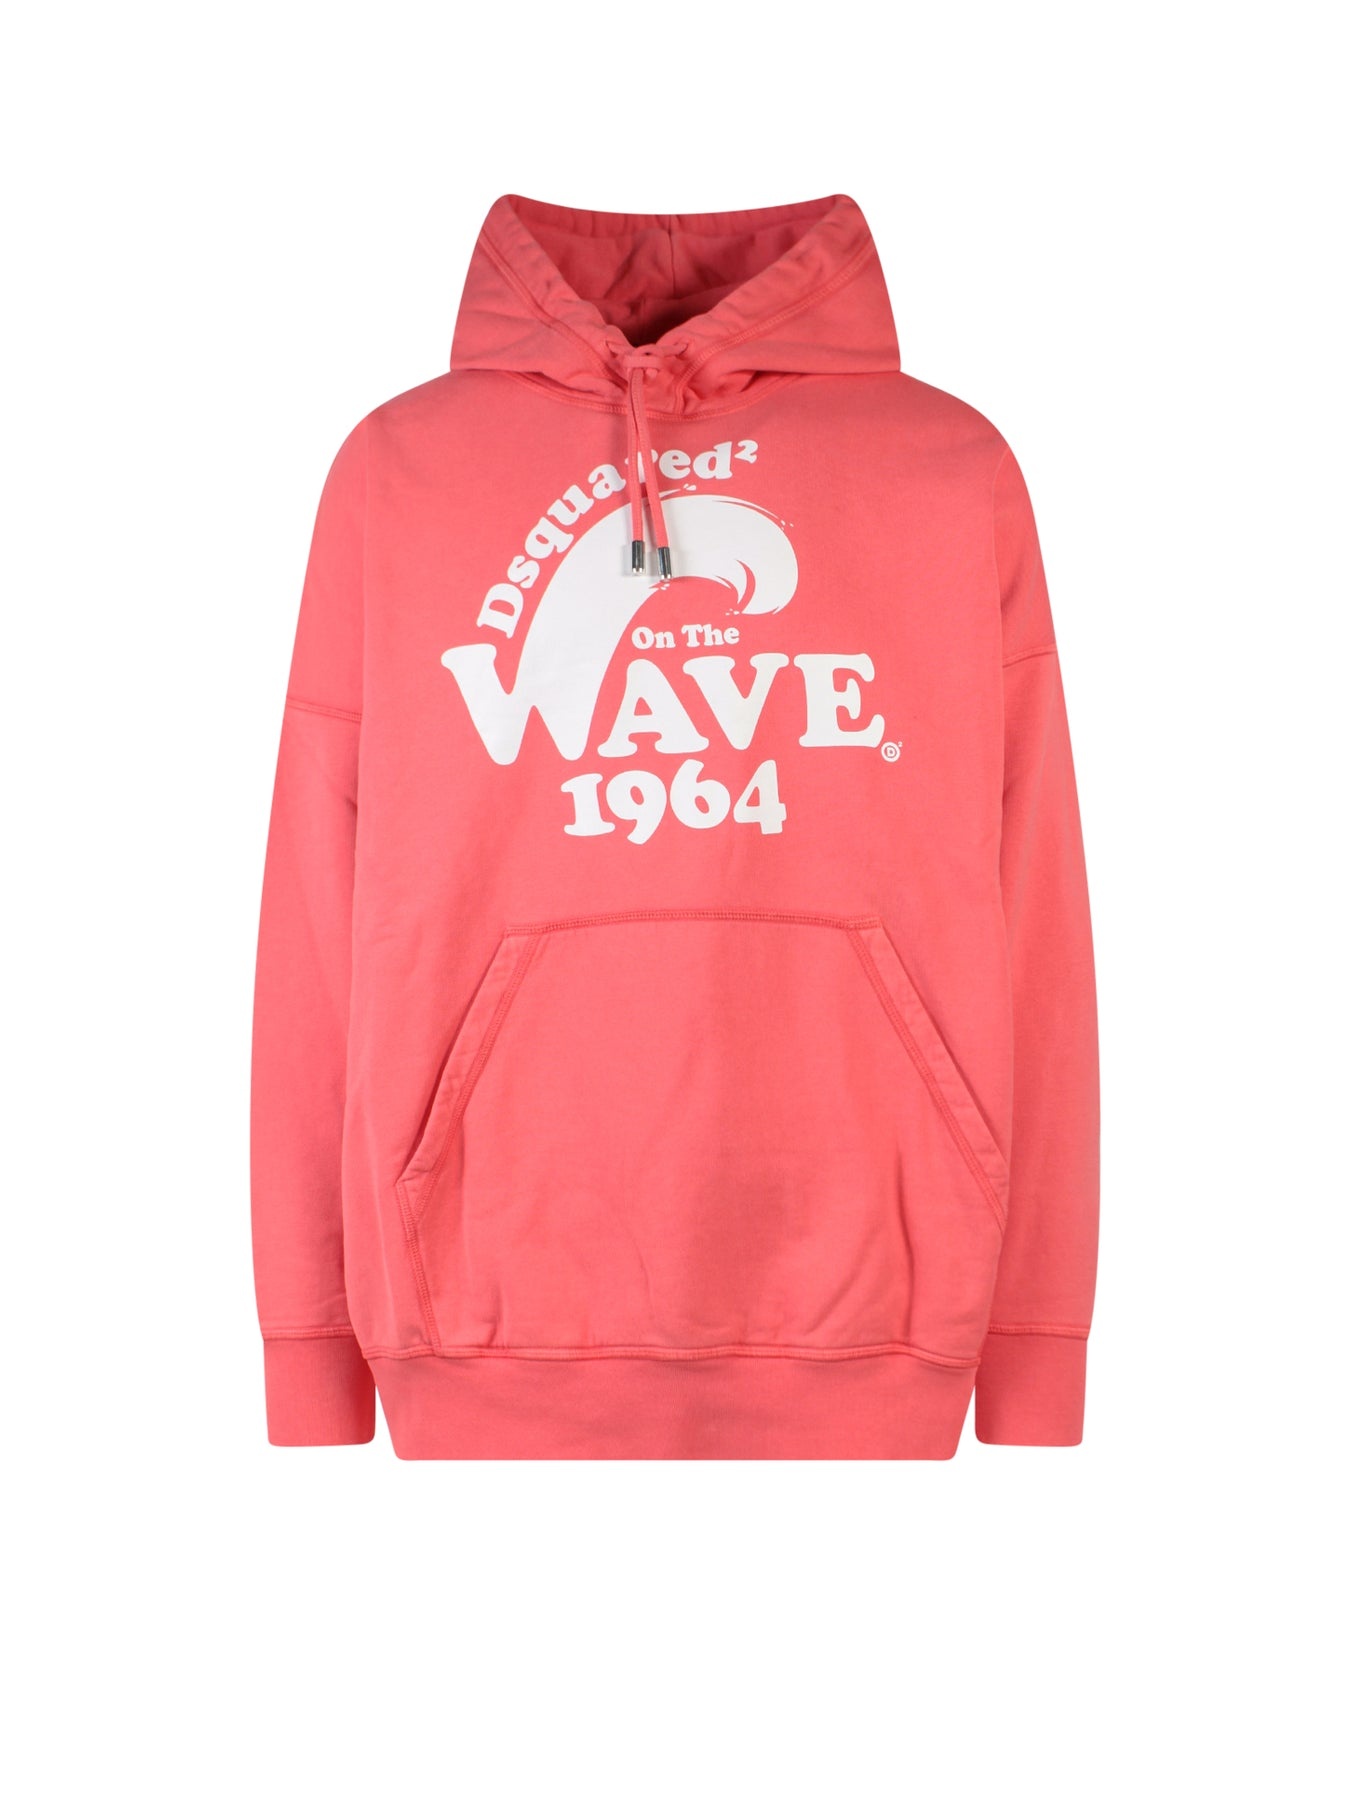 Cotton sweatshirt with print on the front - 1